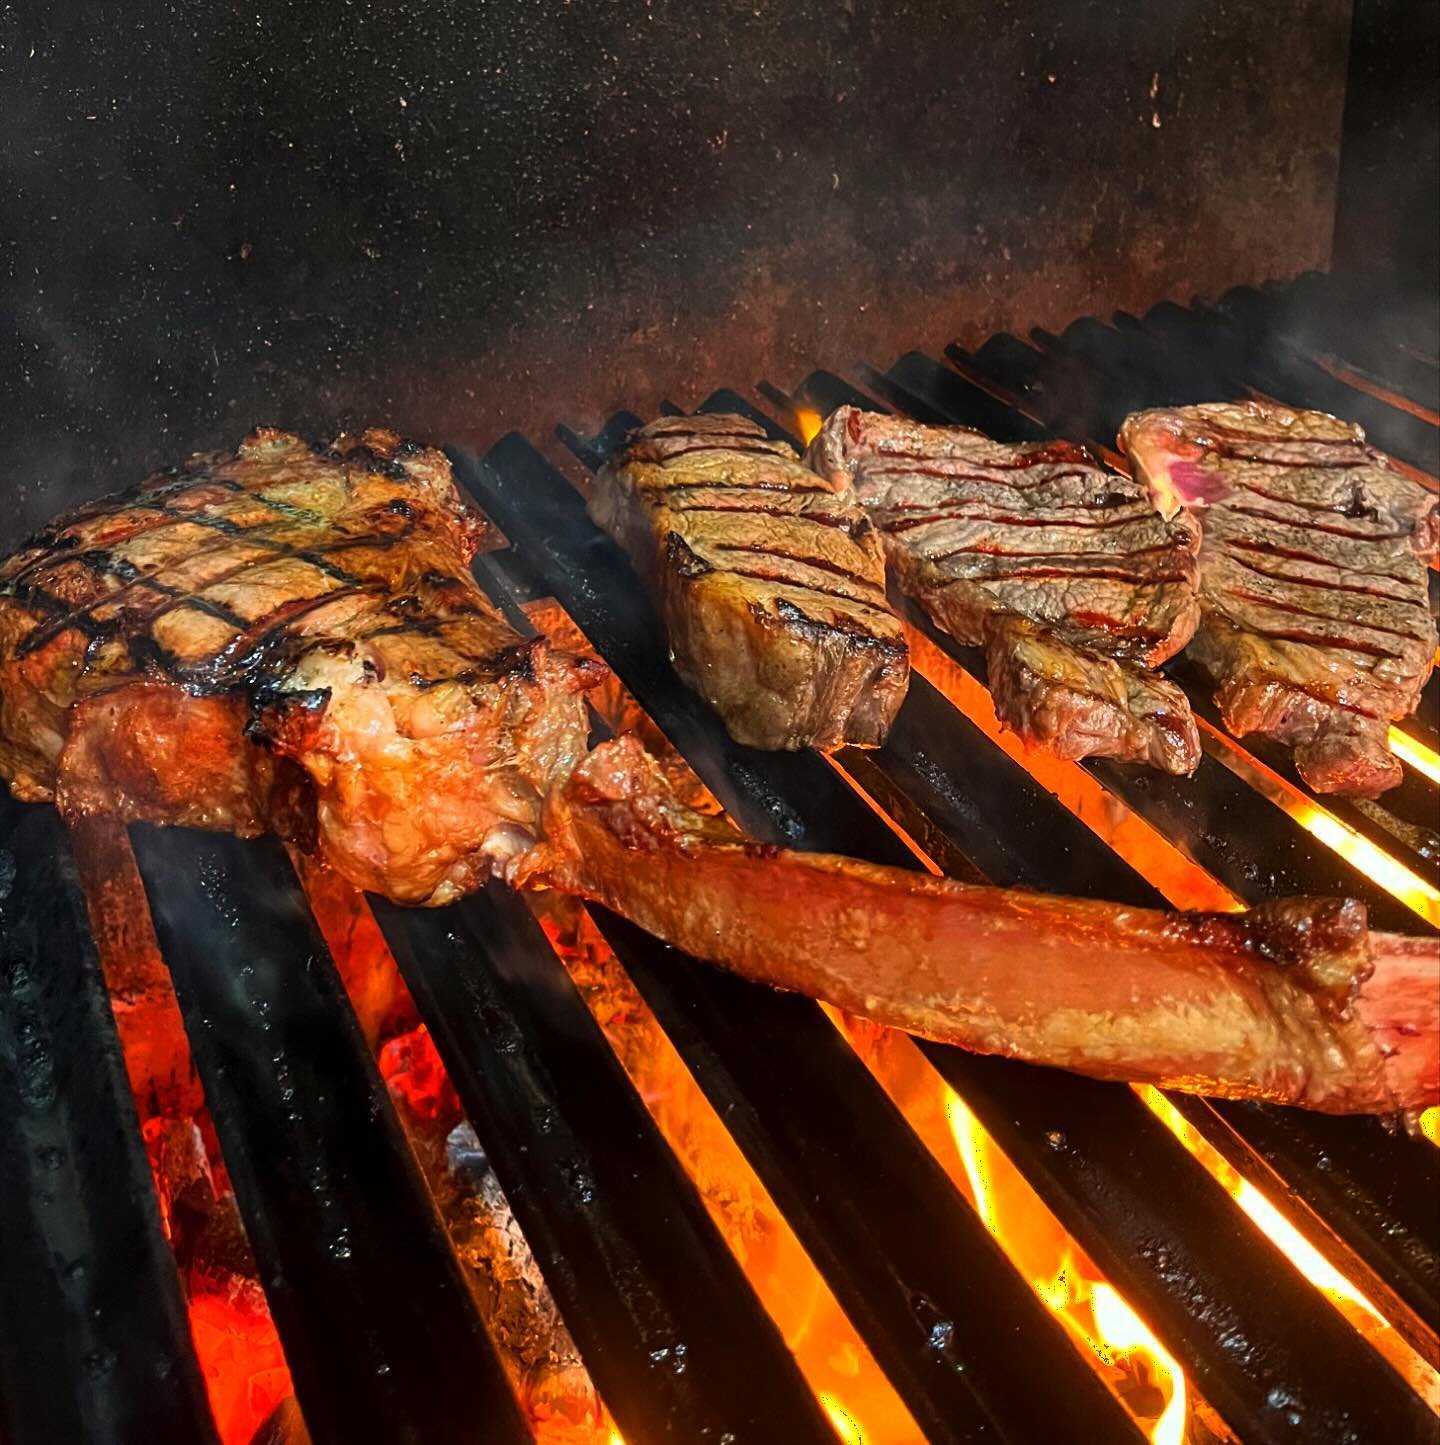 The Tomahawk 🔥🥩🔥 grilled on a Solas Grill with Charcoal, Wood &amp; Fire 🔥🔥🔥
Authentic Steakhouse where all our Steaks 🥩 are always Grilled on a Solas Grill 🔥🔥🔥 
#buffaloboysteakhouse #carrickonshannon #leitrim #leitrimtourism #leitrimobser